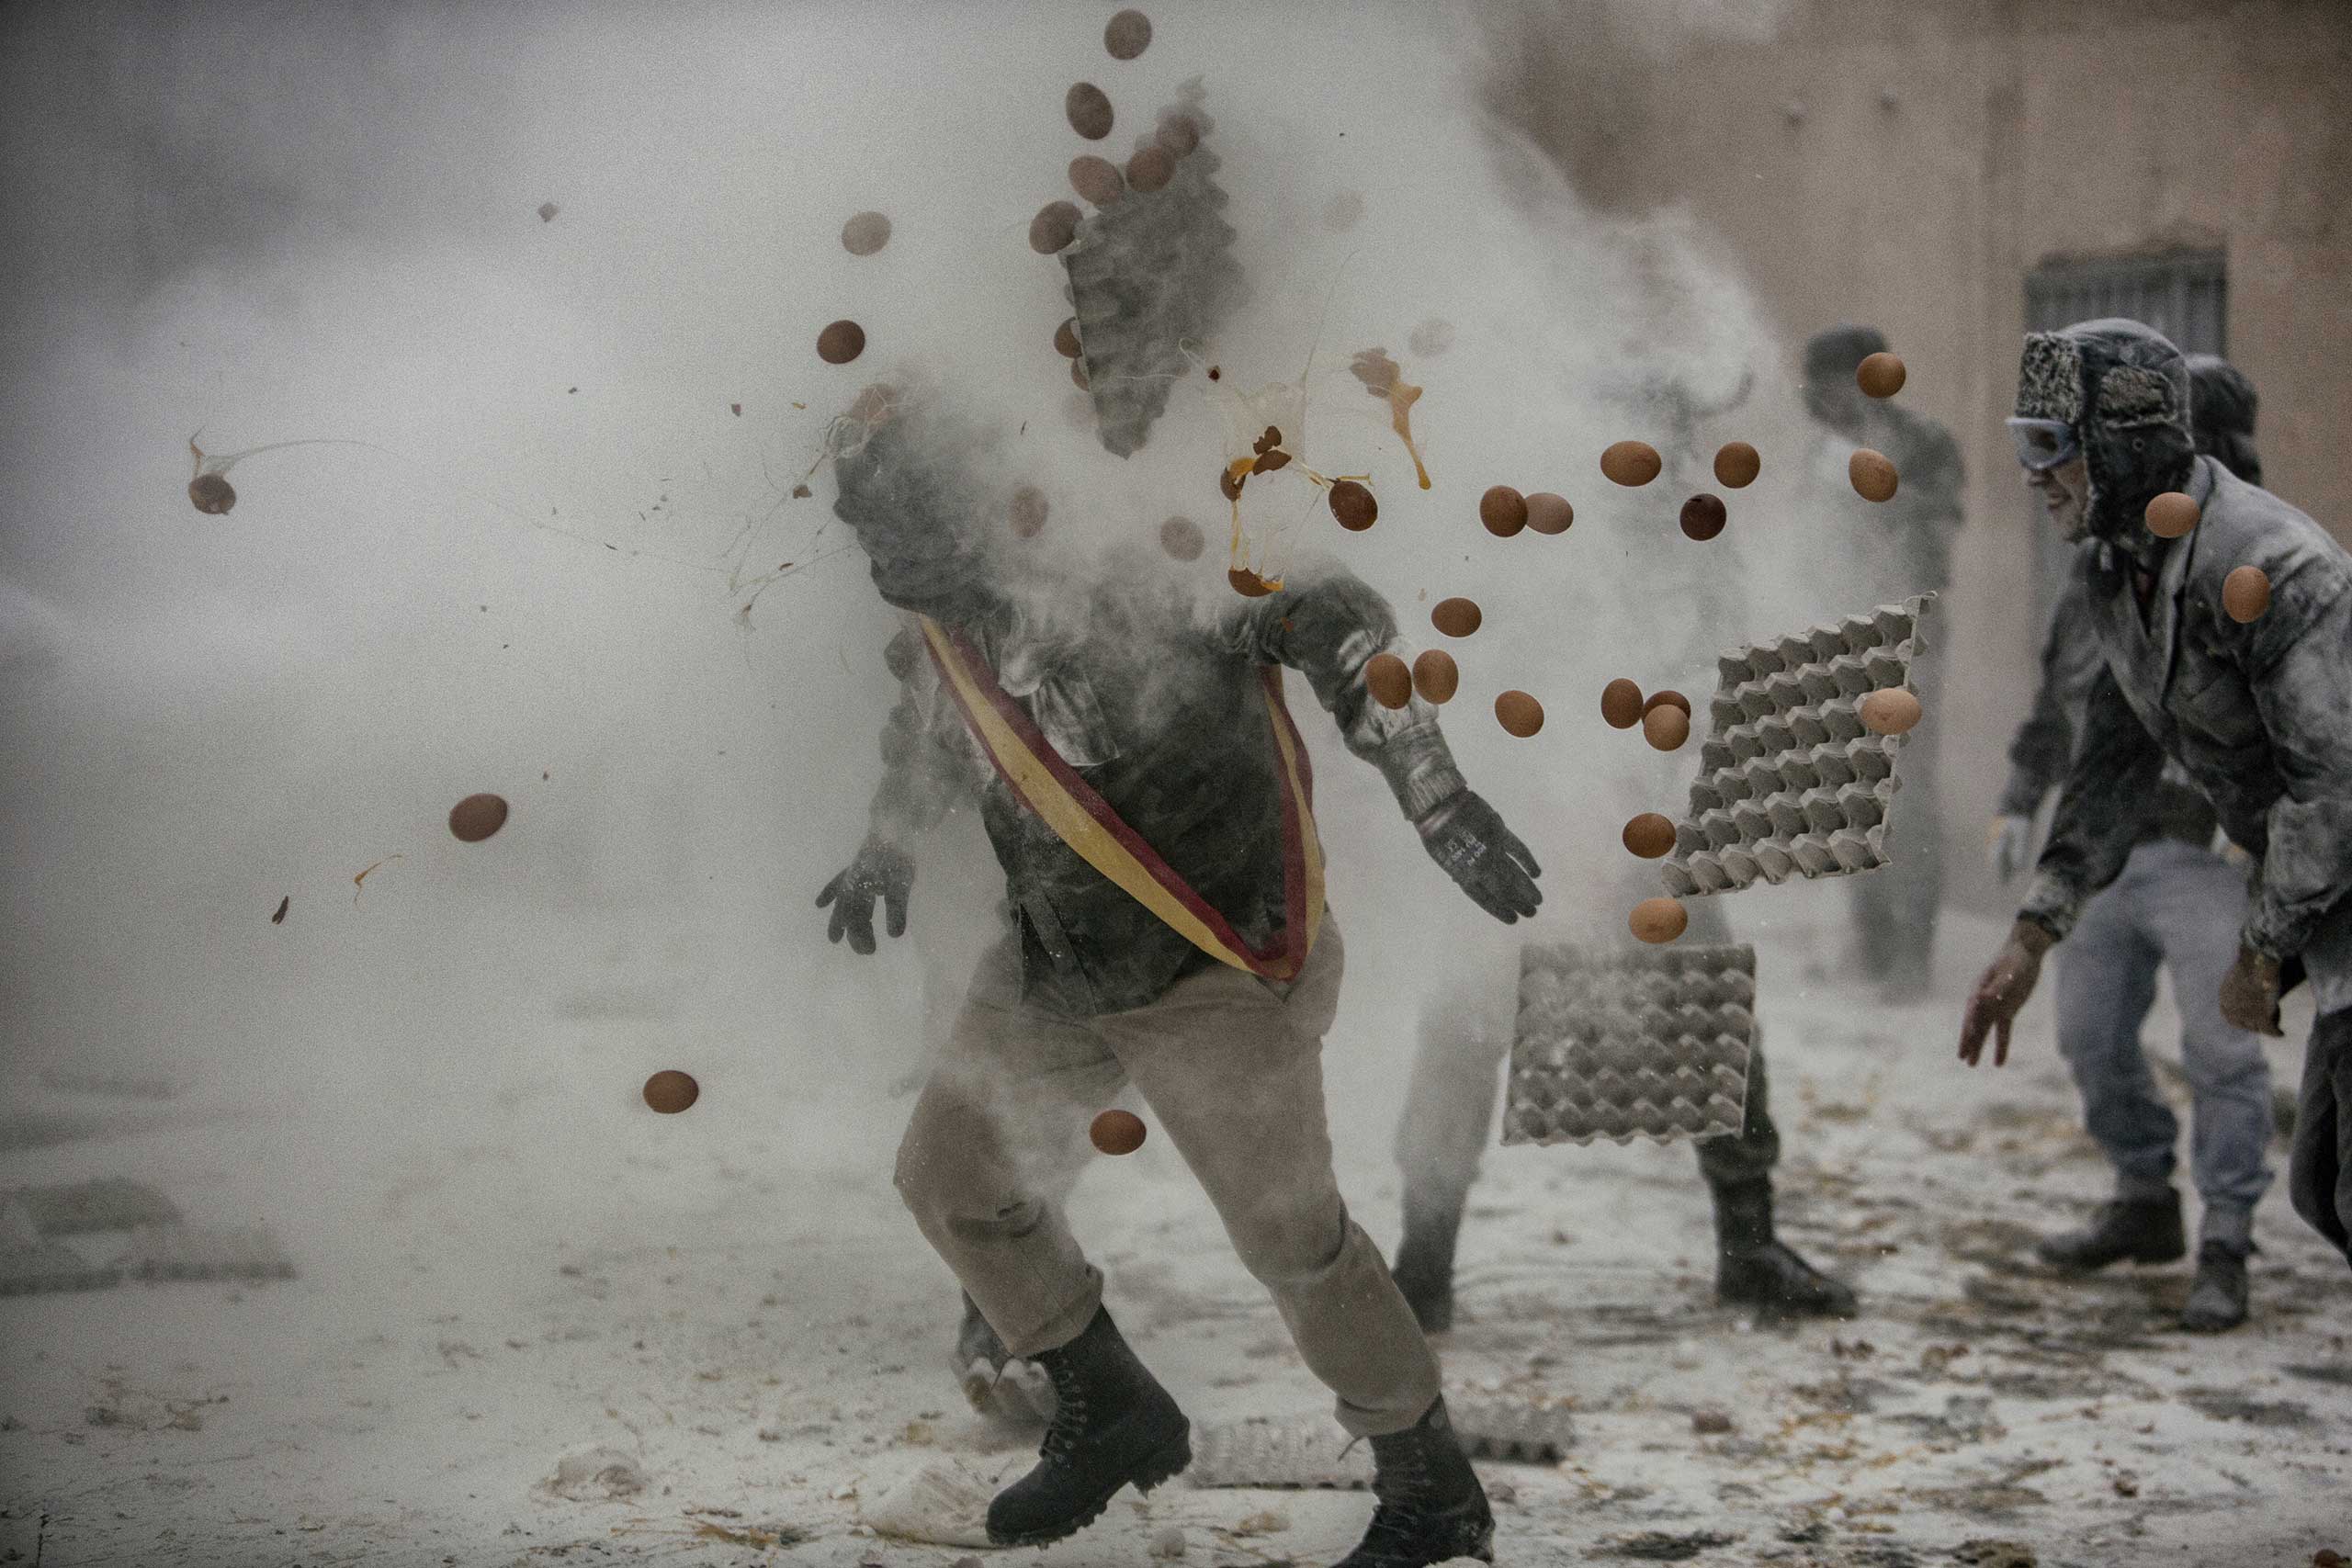 On Dec. 28 each year, the “Floured War  takes place in Ibi in the province of Alicante, Spain. During the festival, the citizens are divided into two groups: the 'Enfarinat' (the floured) group simulates a coup d'etat and a second group tries to calm the rebellion. The teams play with flour, water, eggs and colored smoke bombs.